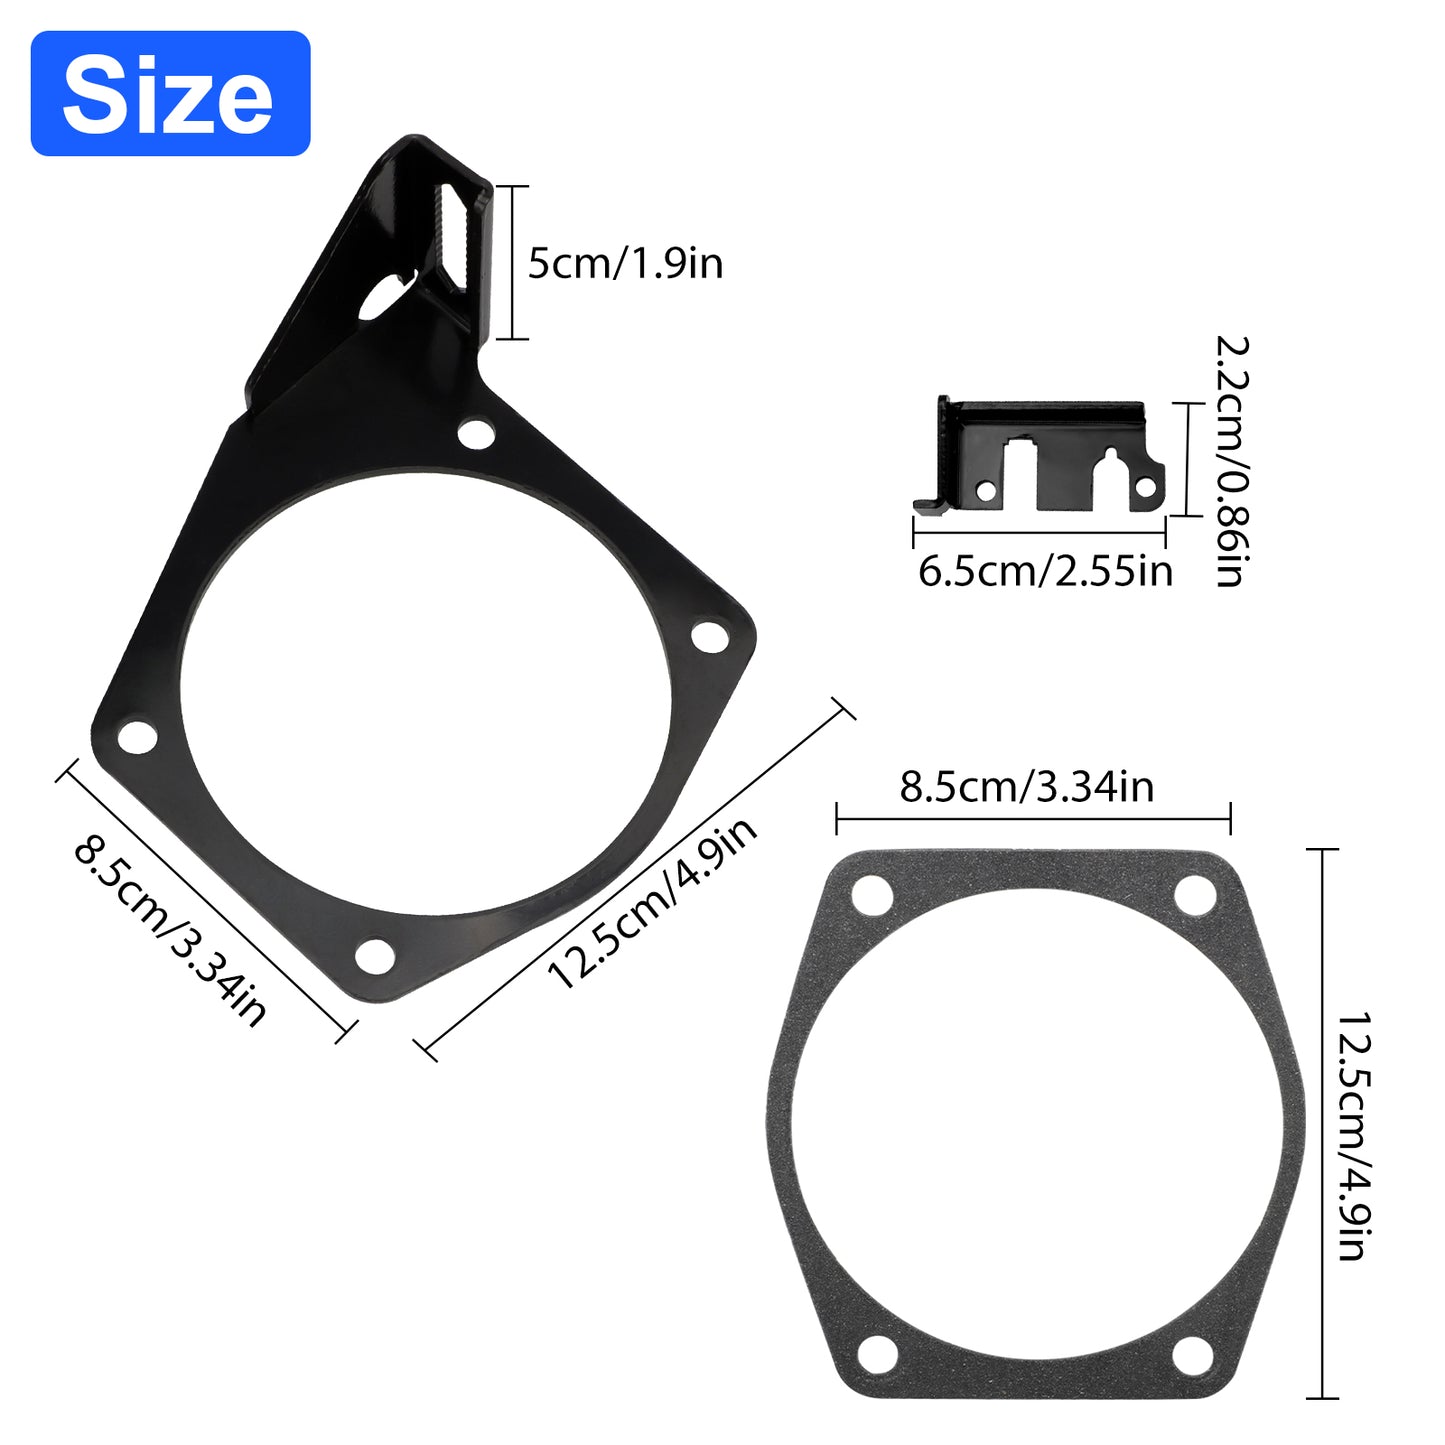 Throttle Cable Bracket - Throttle Body Cable Bracket for 92-102mm LS LS1 LS3 LS6 4 Bolts Intake Manifold Car Accessories